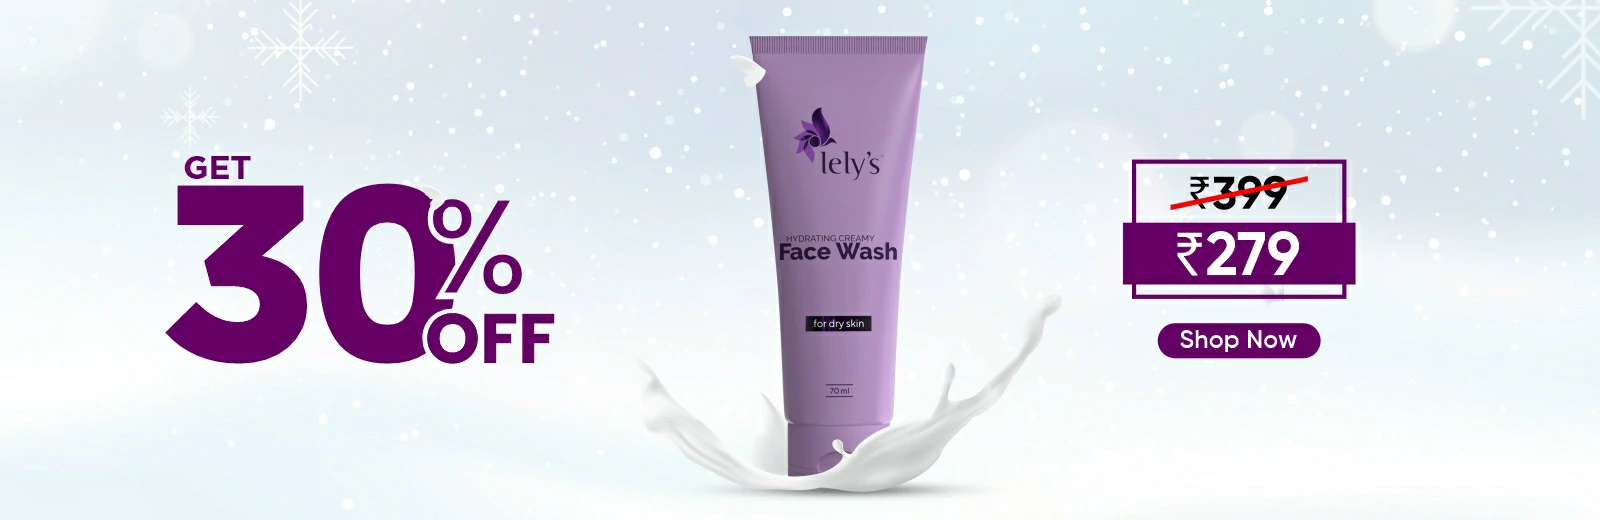 Hydrating Face Wash at 30% off